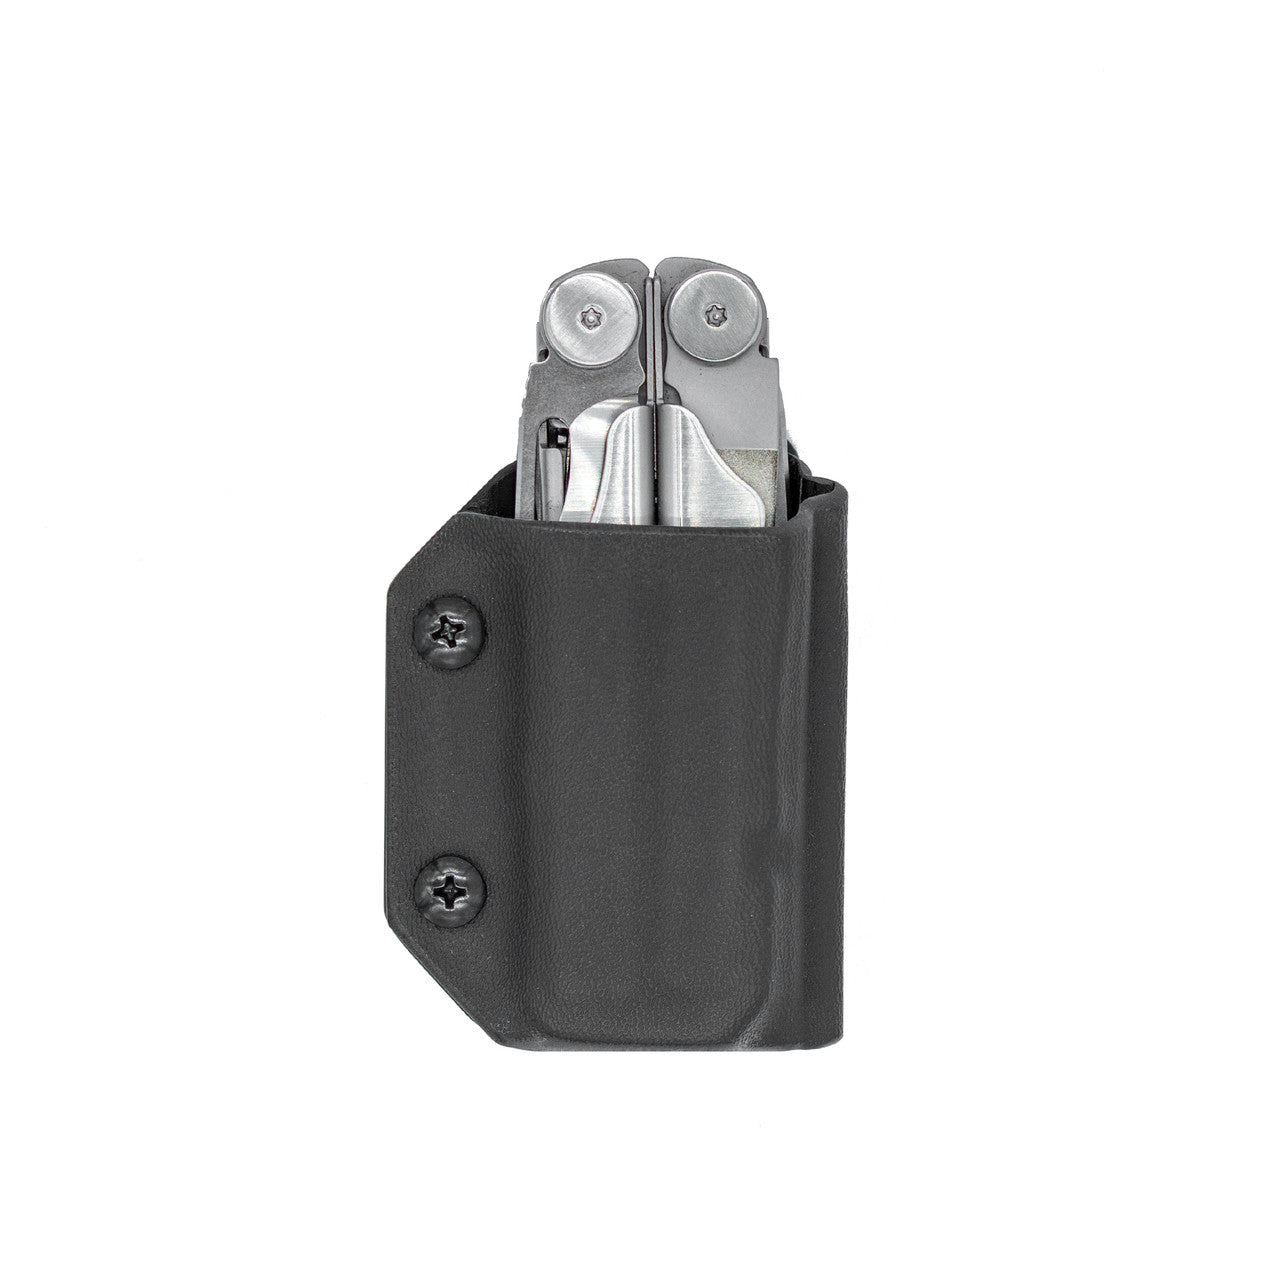 Kydex Sheath for the Leatherman Wave & Wave+ Clip & Carry